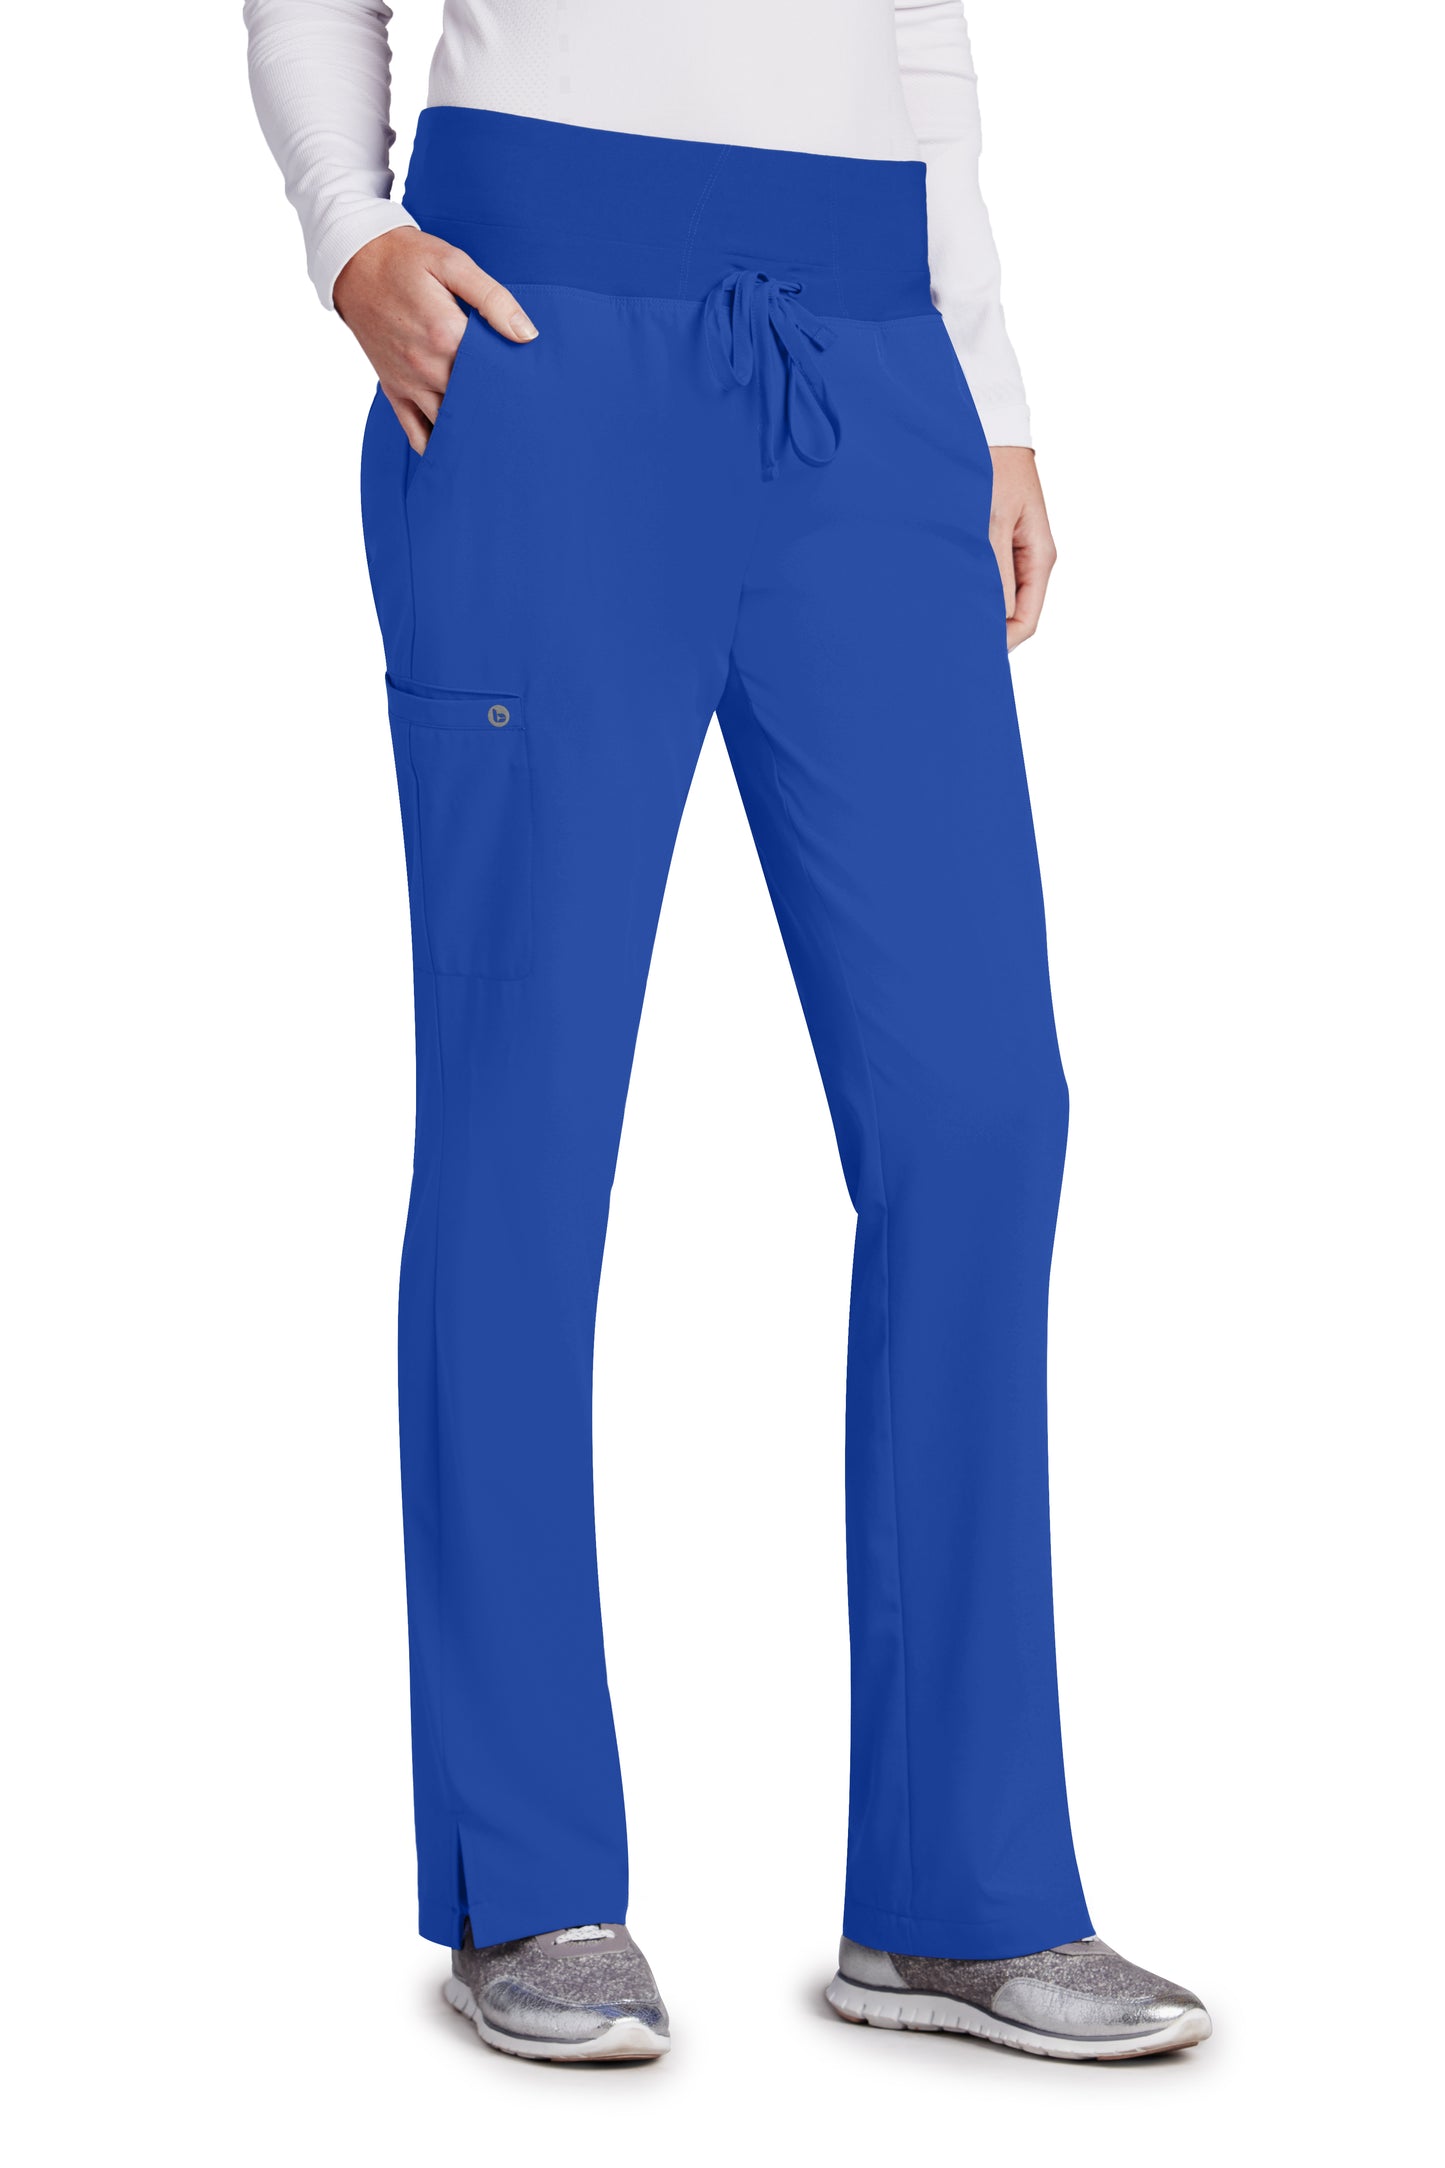 Ocean ave Women's Support Waistband Scrub Pants with Cargo Pocket, Size 2XL  Tall Inseam, Royal Blue